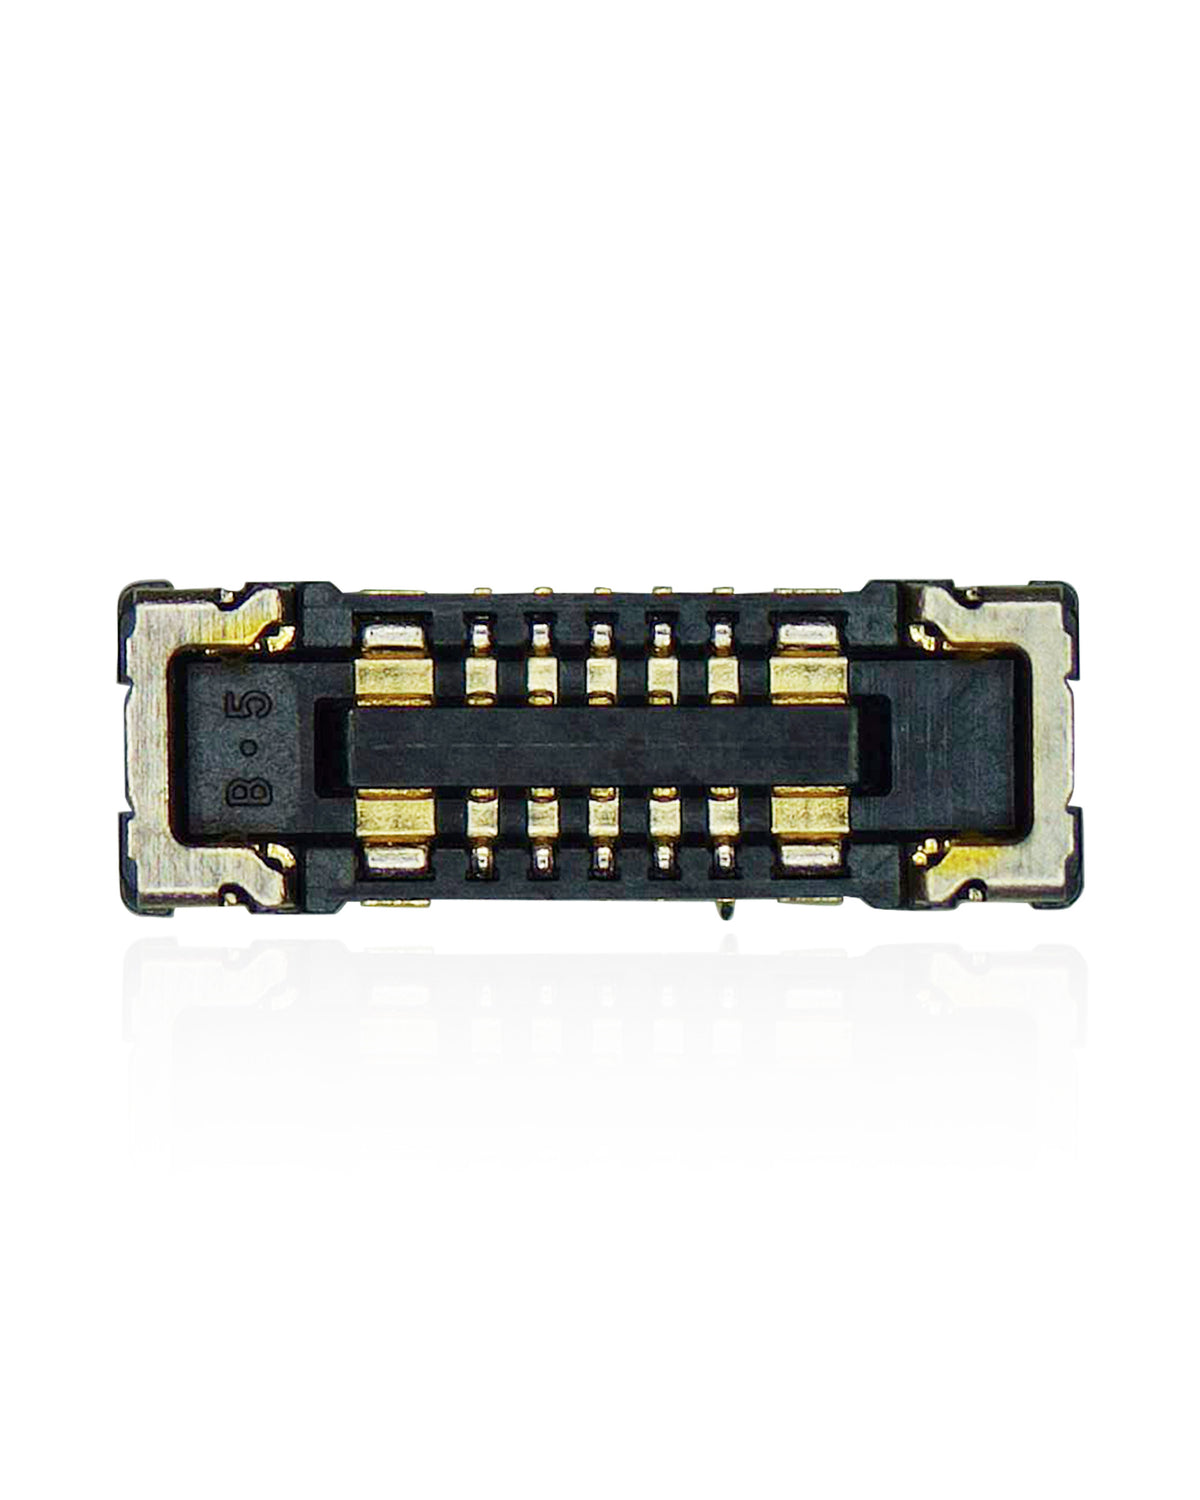 LATTICE PROJECTOR FACE ID FPC CONNECTOR COMPATIBLE WITH IPHONE XS / XS MAX (J4500: 10 PIN)